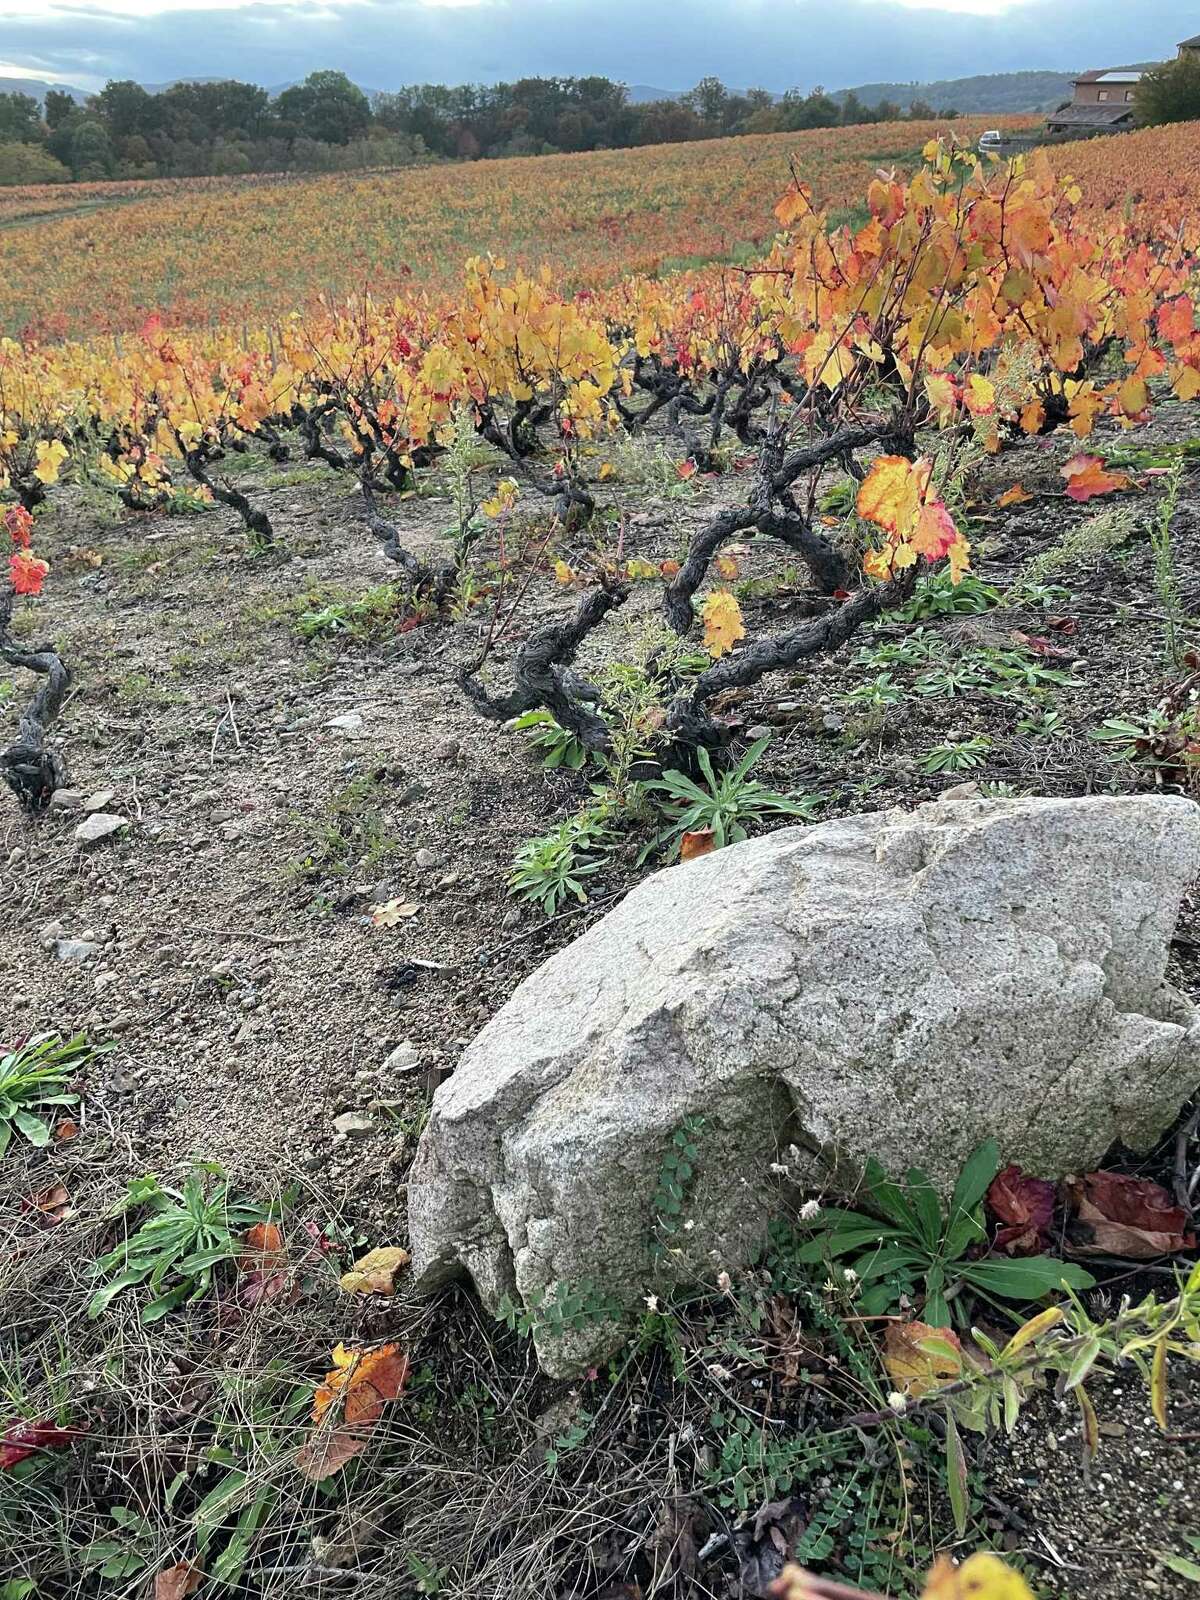 Jonathan Pey's Beaujolais vineyard sits above 1,300 feet in elevation and has large granite soils.